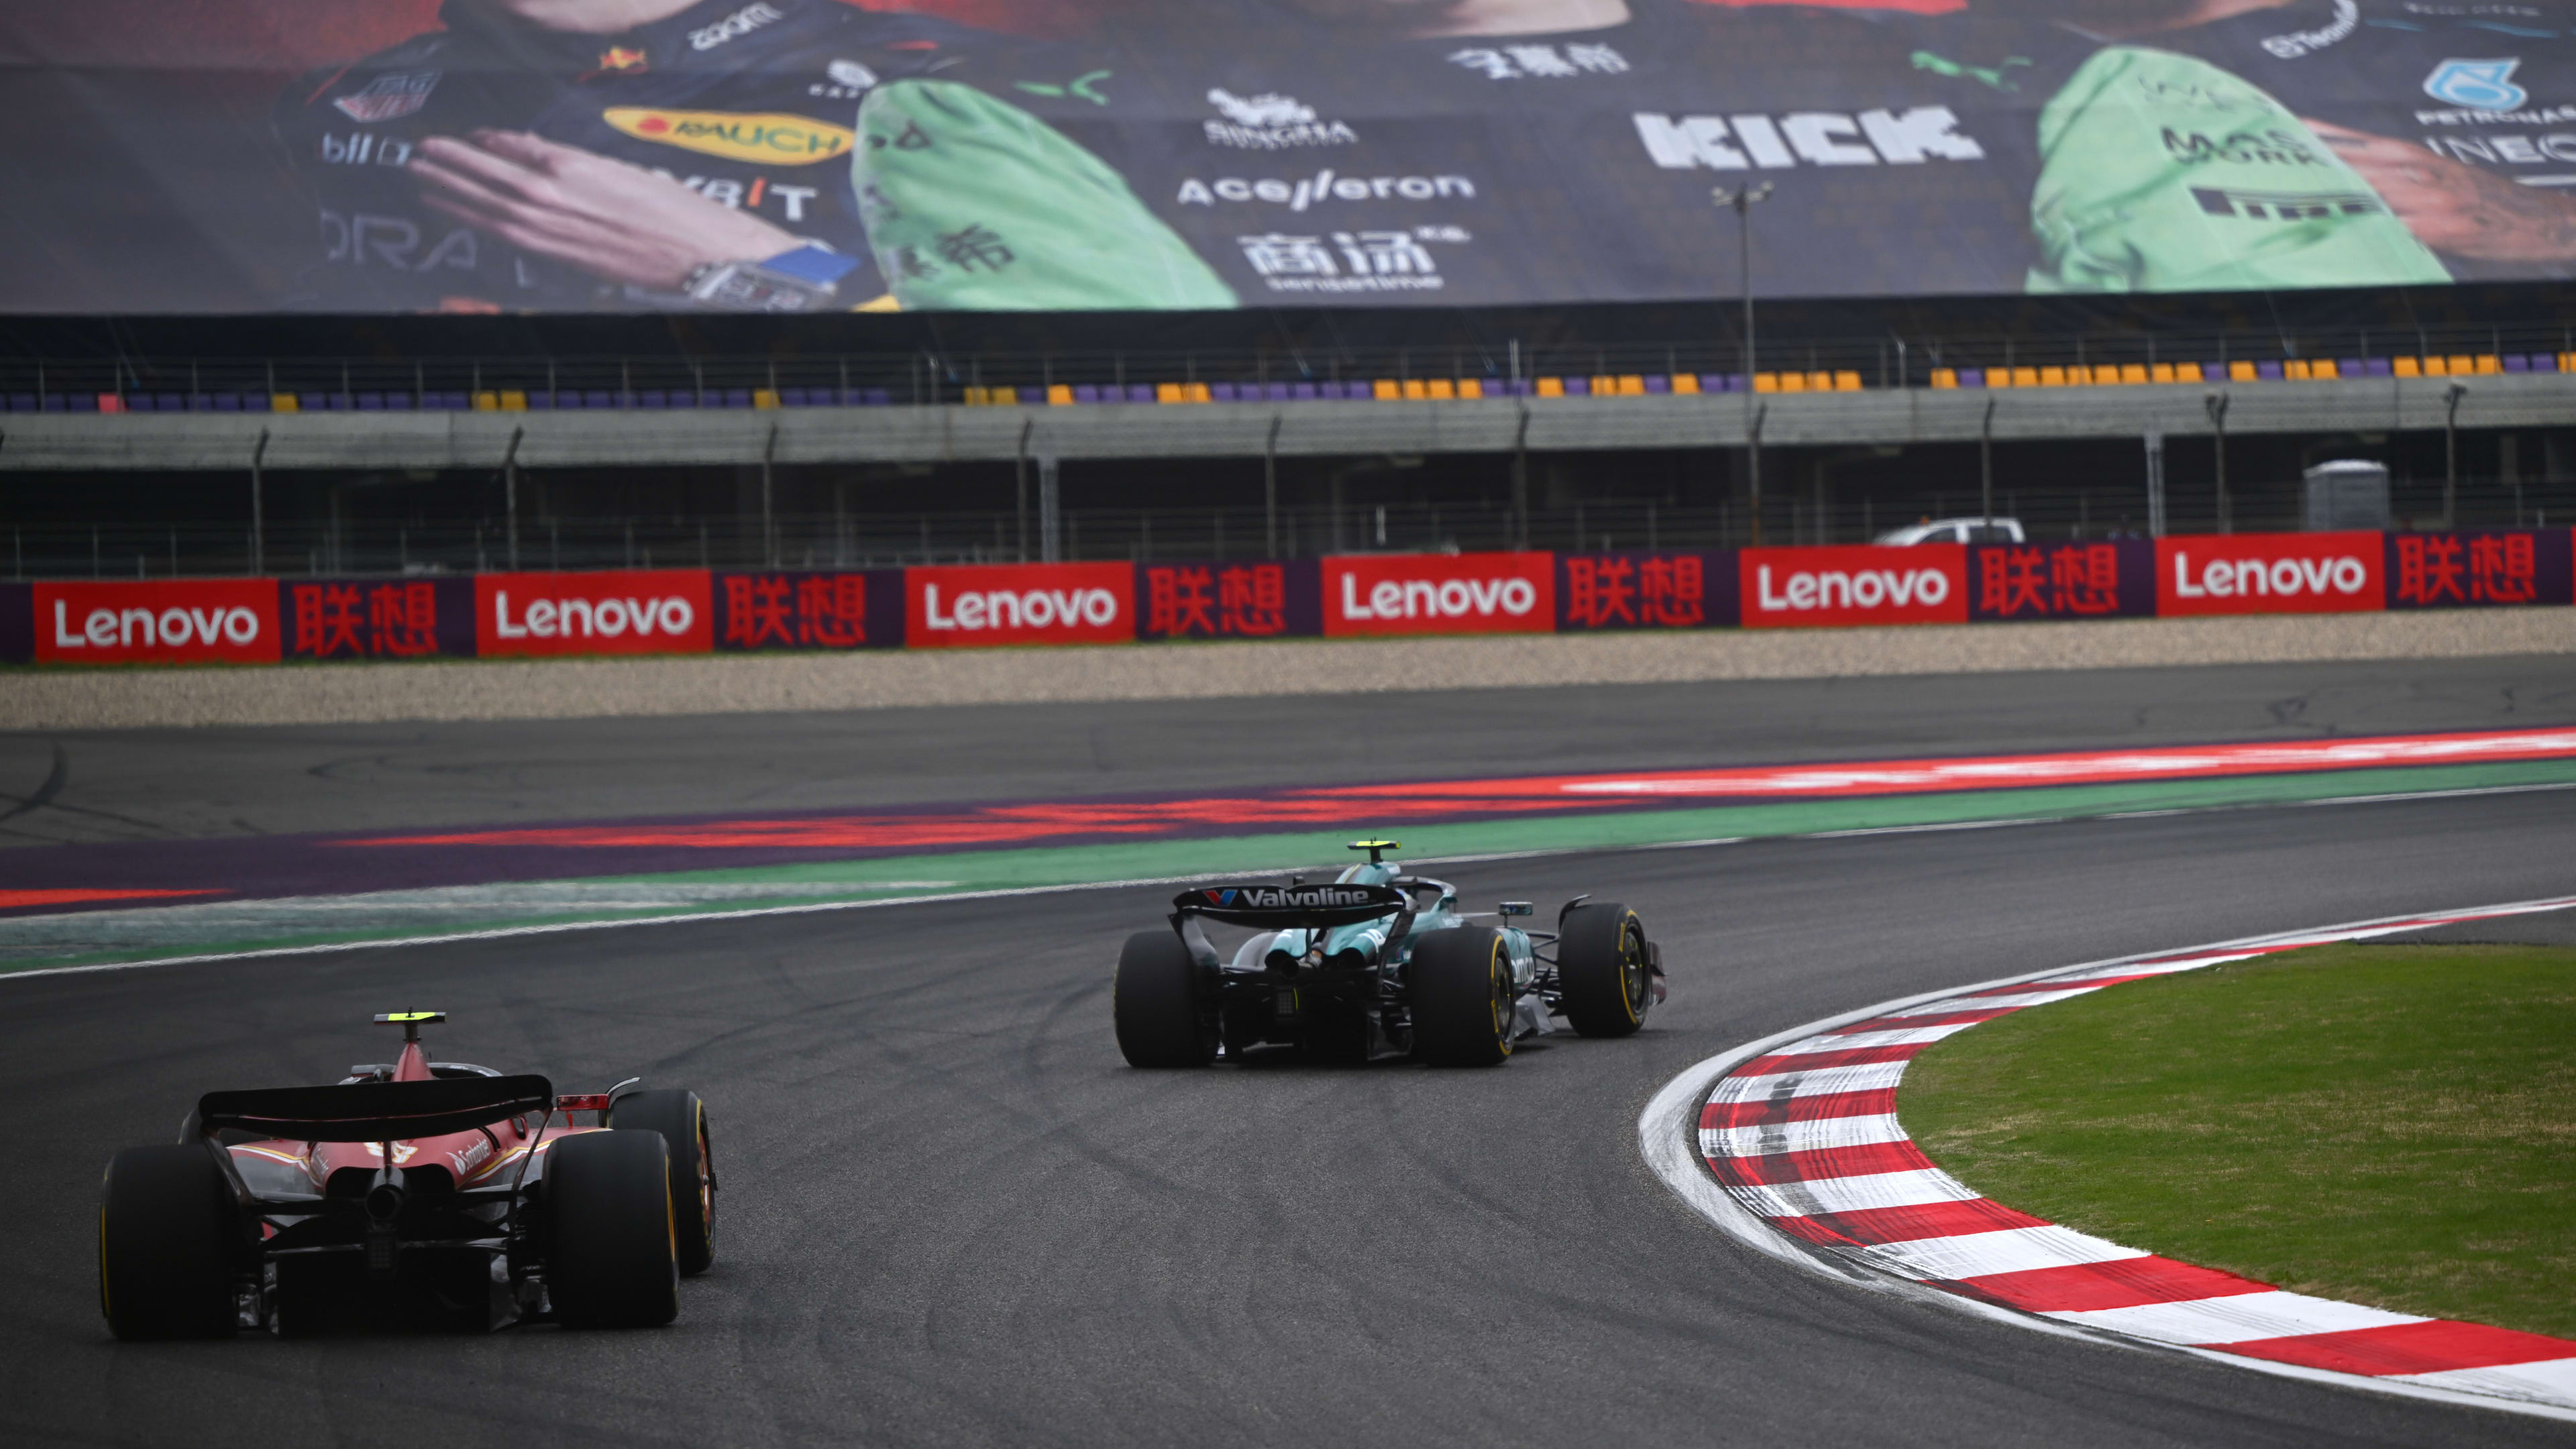 LIVE COVERAGE: Follow all the action from qualifying for the Chinese Grand Prix